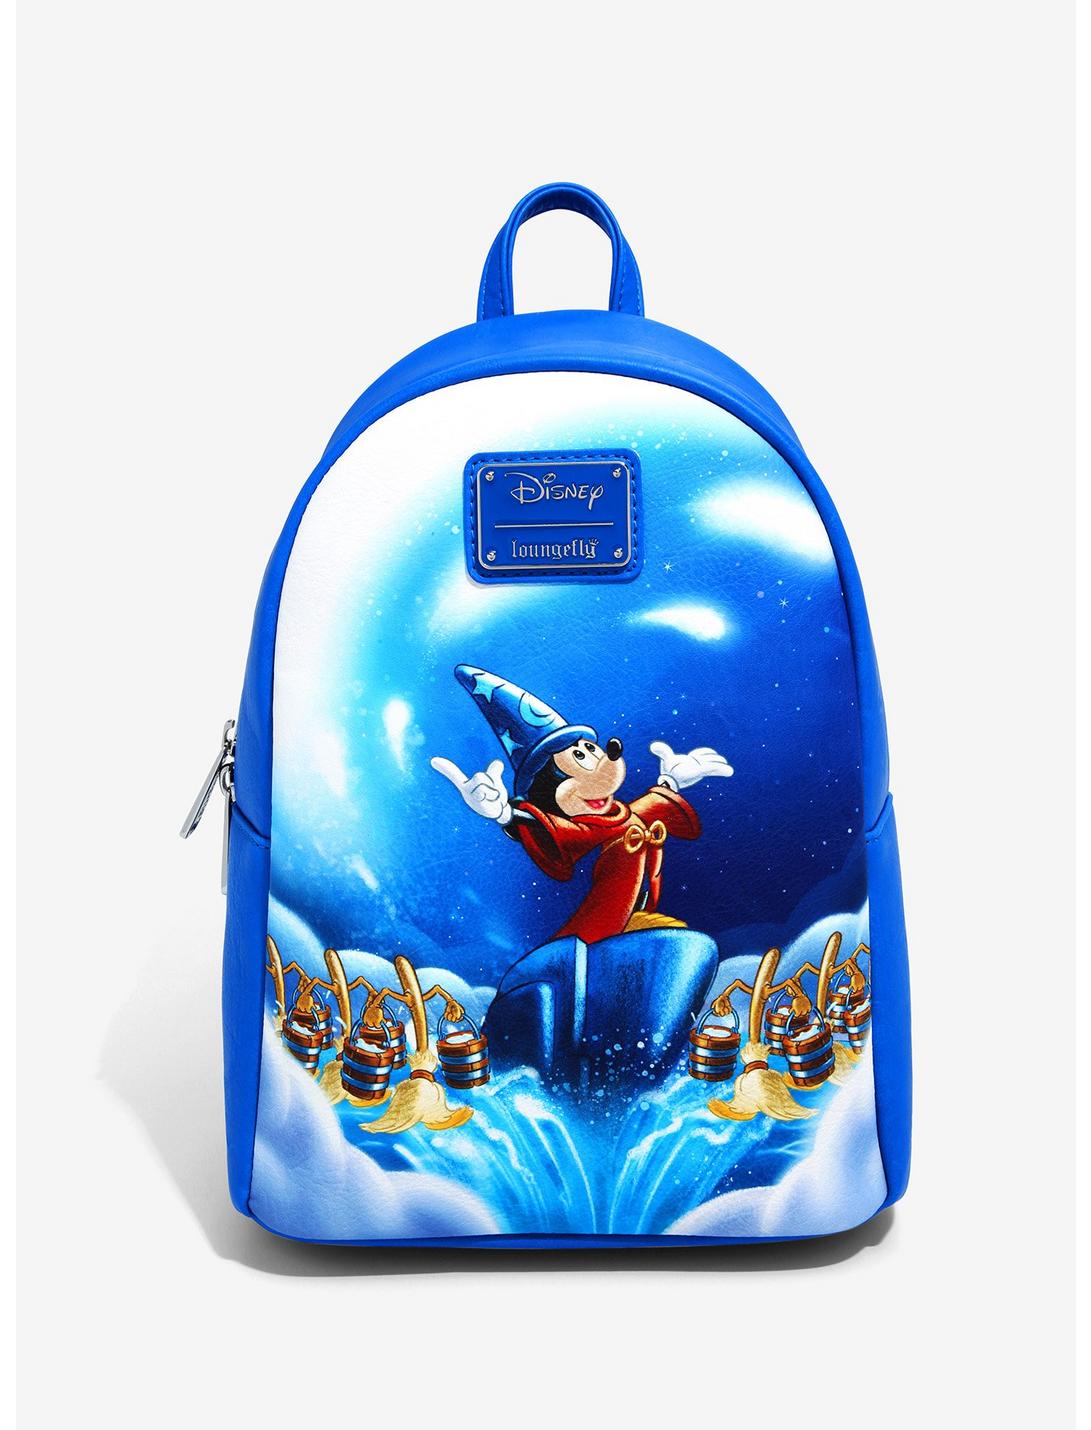 Disney Parks Ink & Paint Sorcerer Mickey Mouse Backpack Loungefly New In Hand